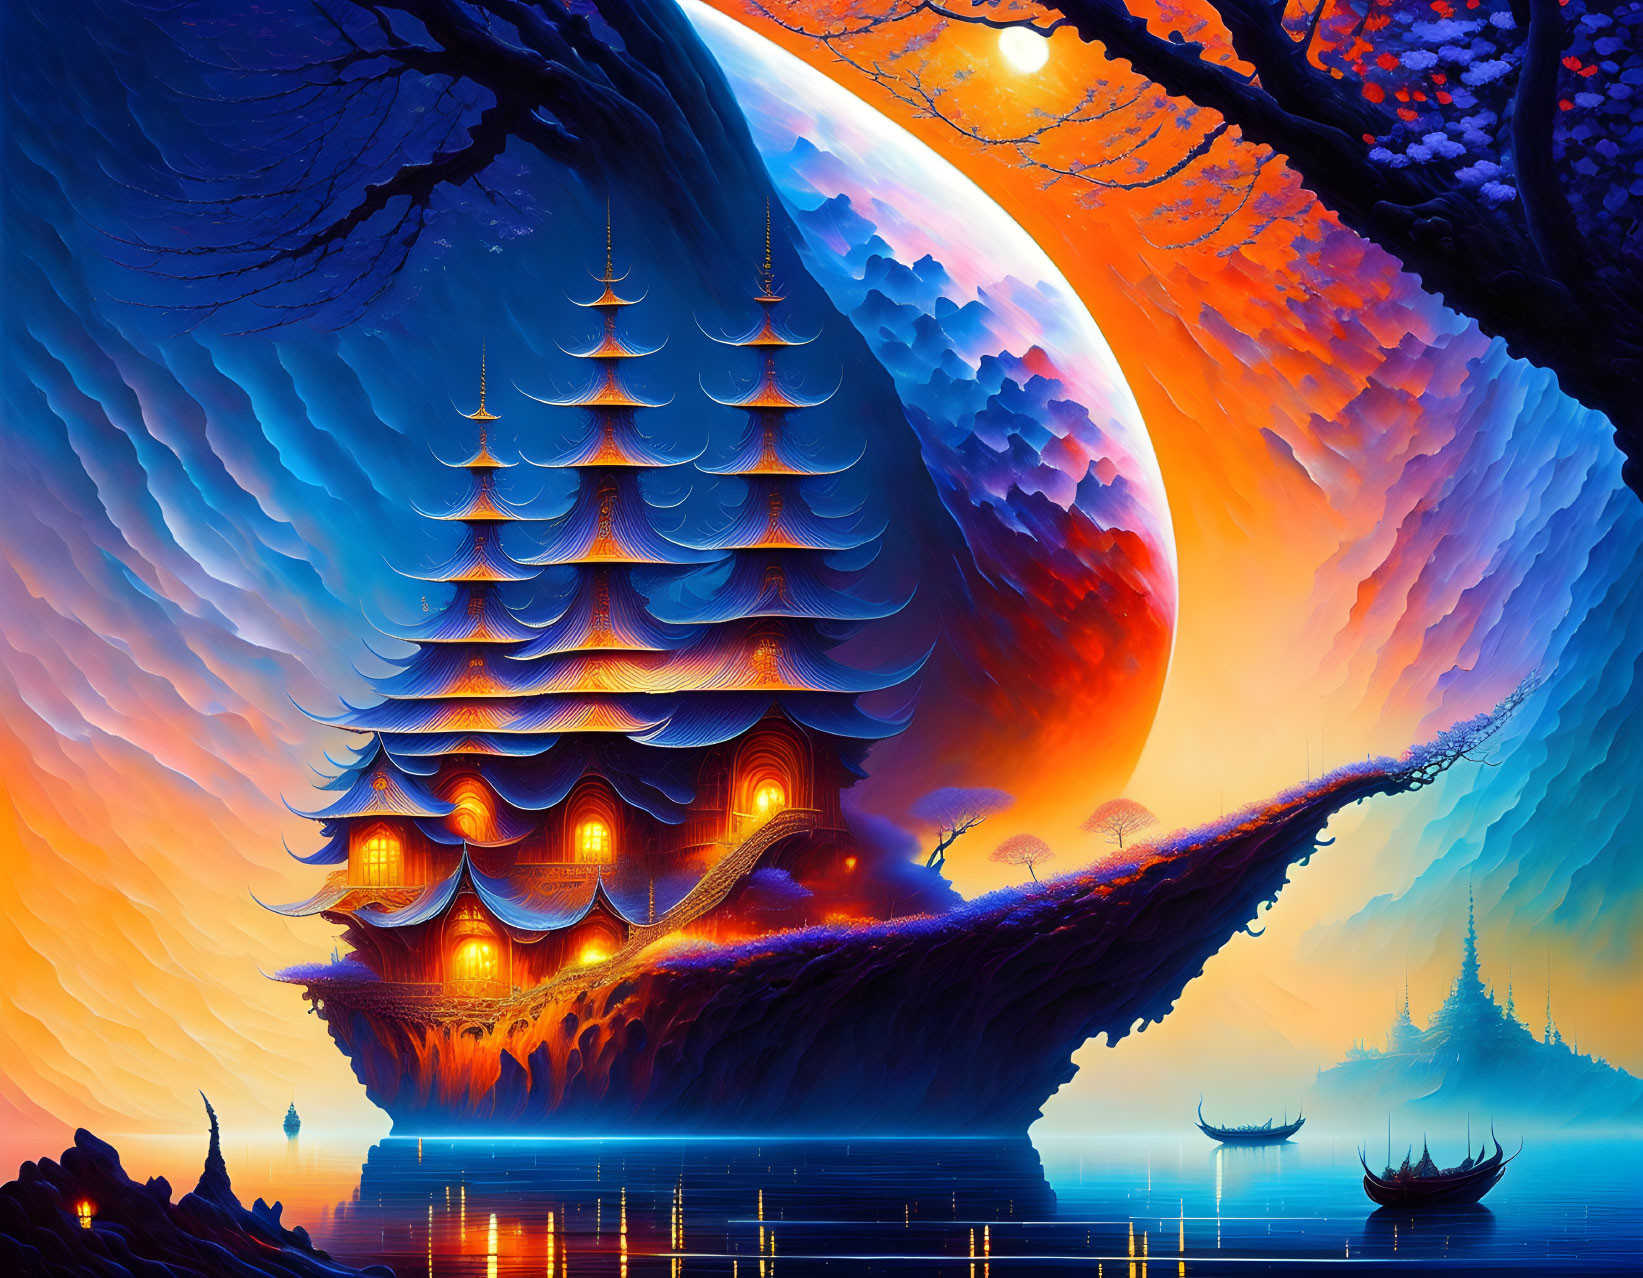 Fantasy artwork: Ship with multiple sails on leaf, serene waters, massive moon.